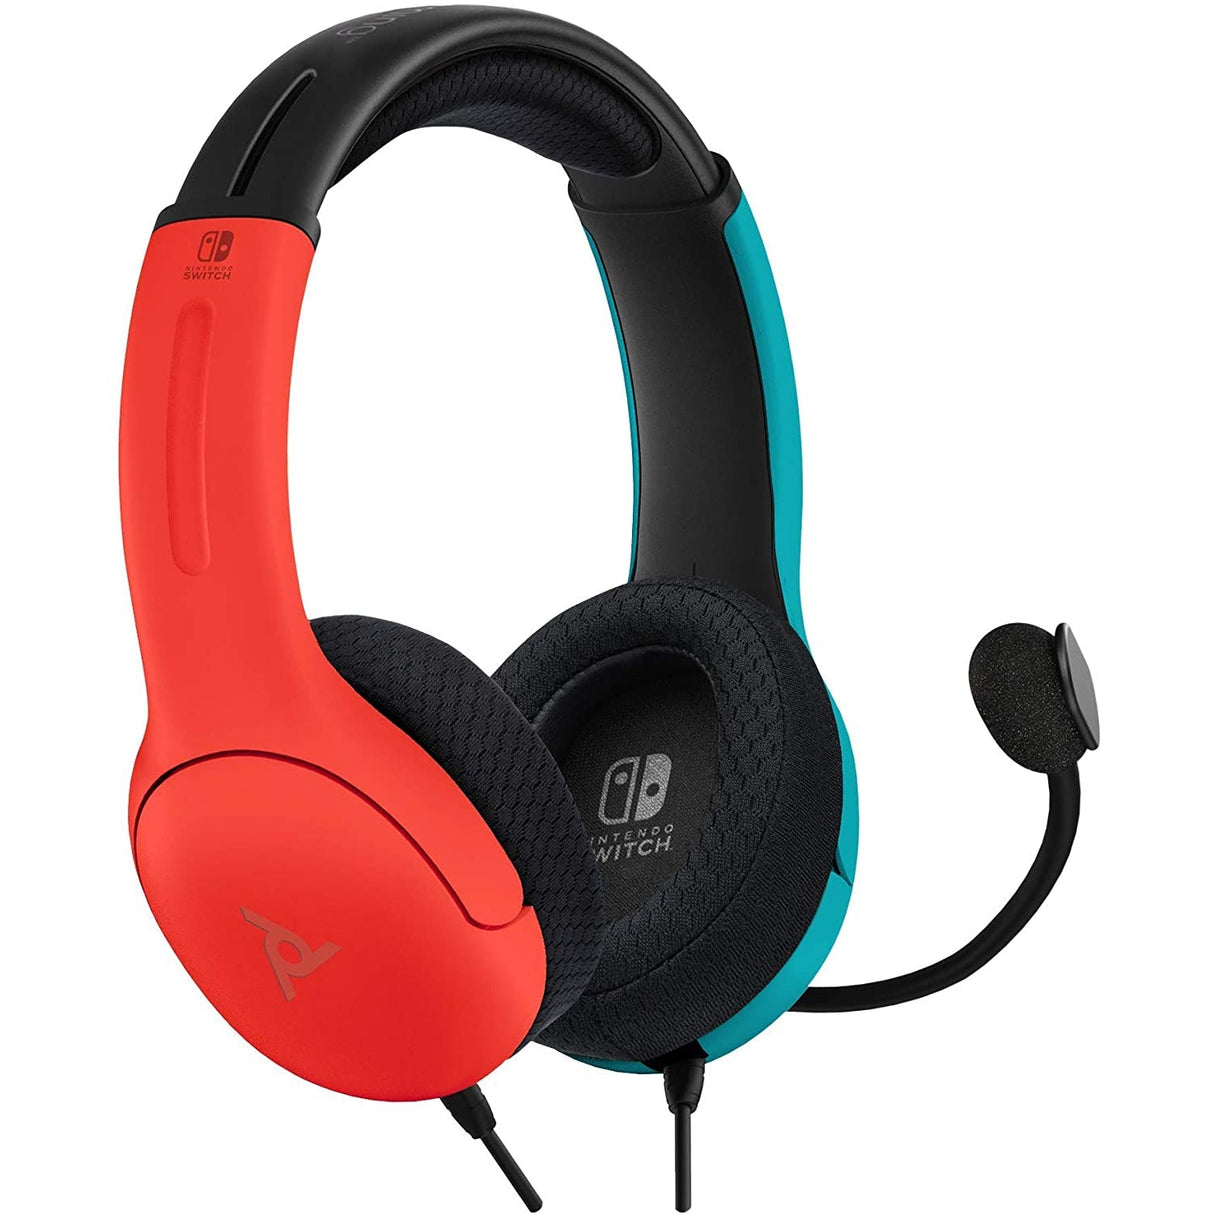 PDP LVL40 Wired Stereo Headset for Nintendo Switch - Blue/Red - Refurbished Pristine